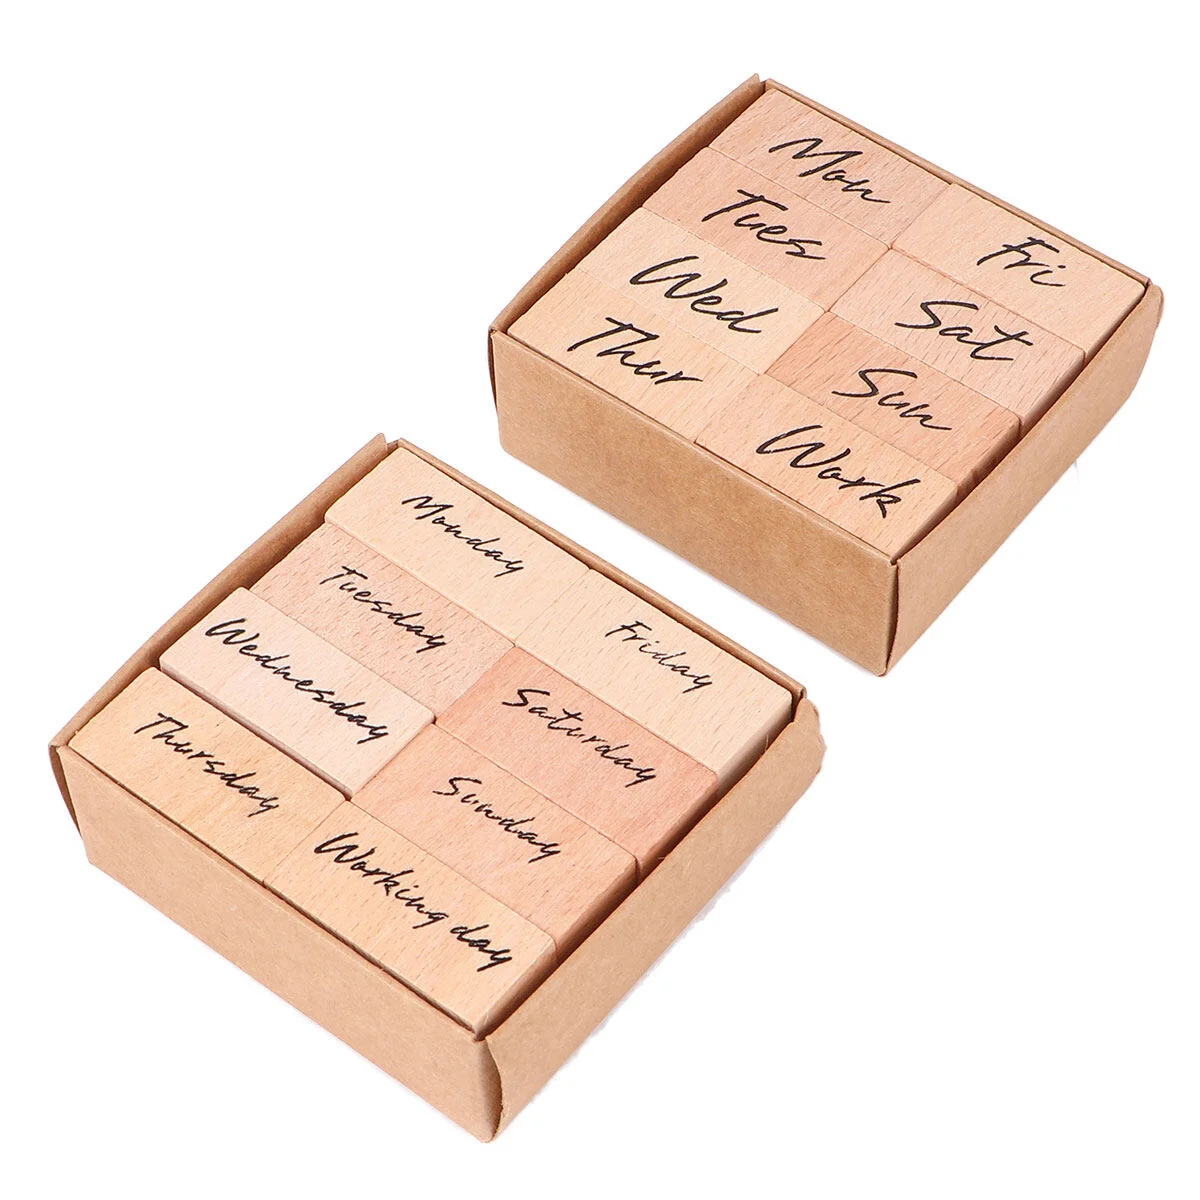 

16pcs Diy Stampss Week Letter Stamps Notebook Hand Account Seal Stamps Wooden Set Stamp DIY Wooden Seting Diary Stamps